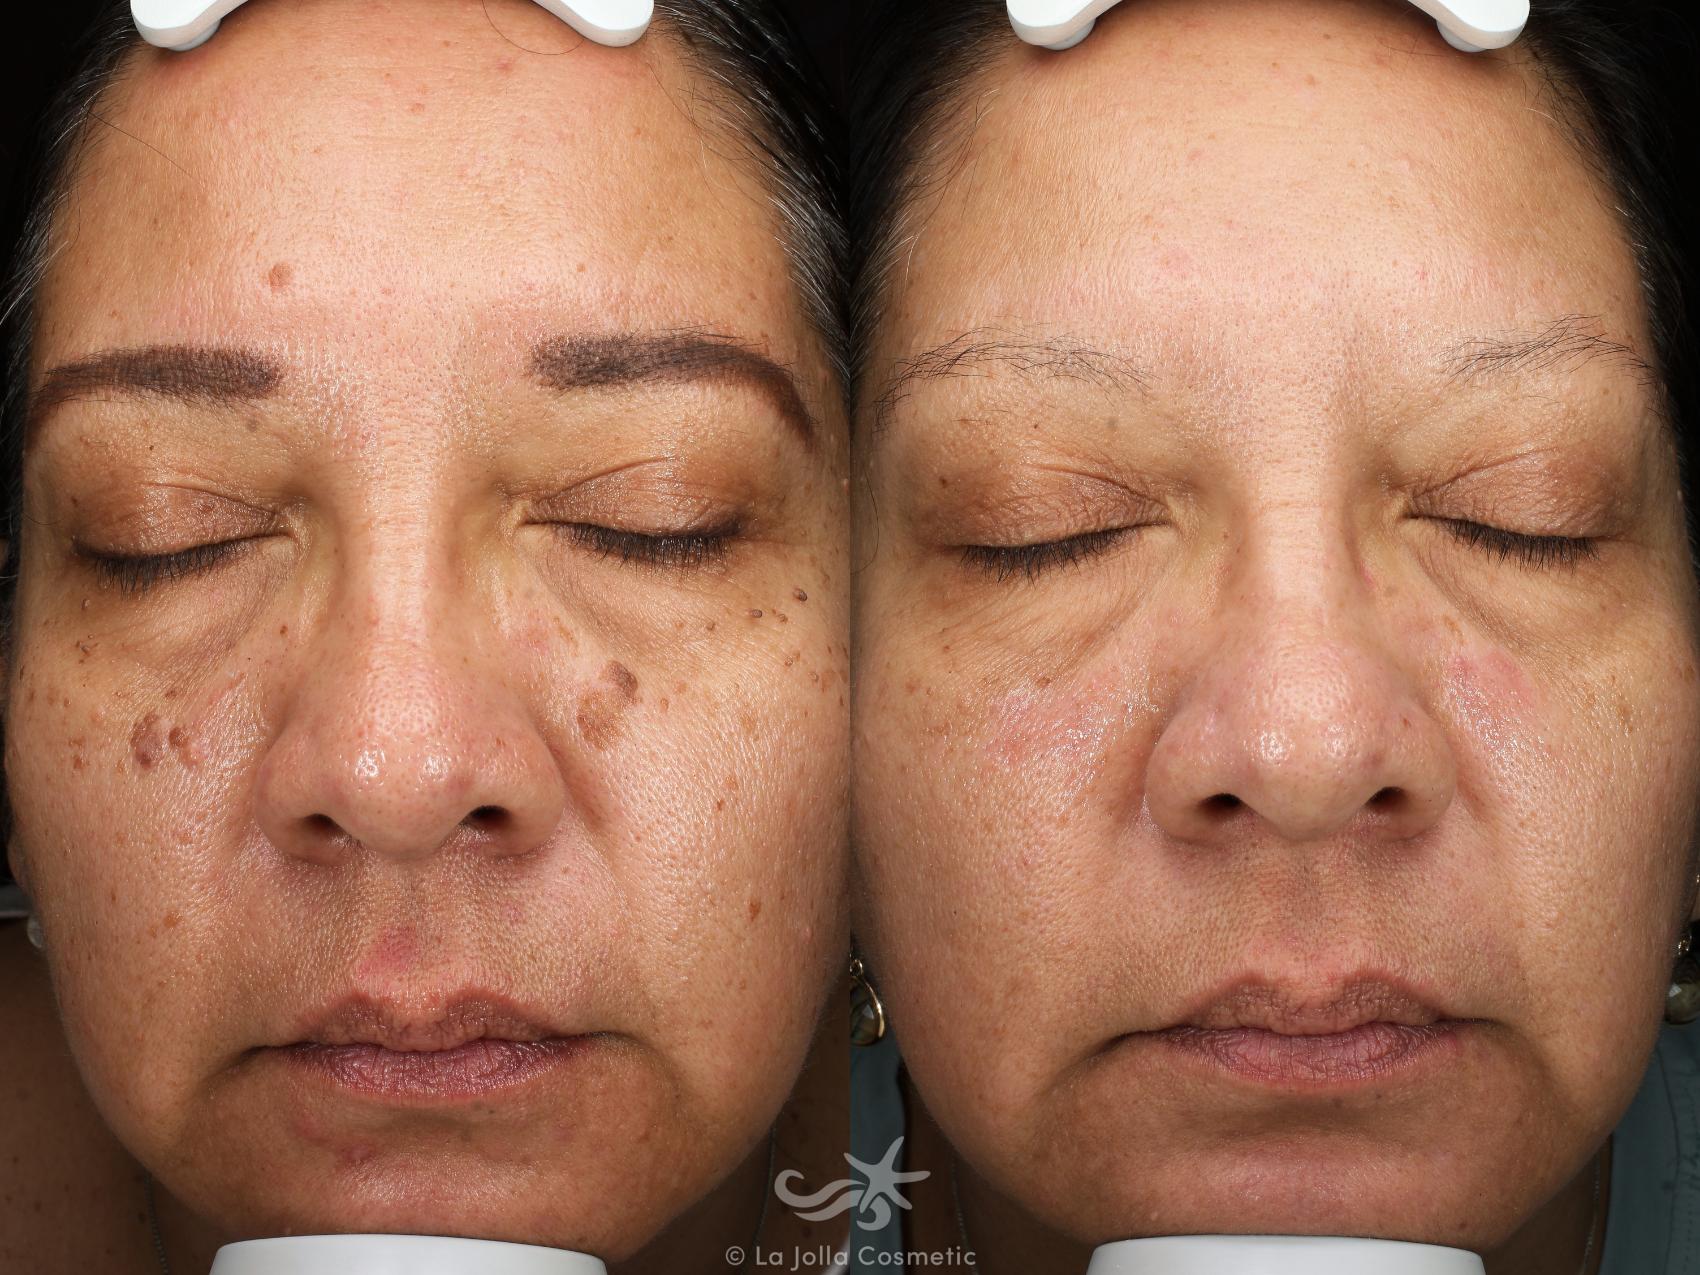 Before & After Laser Treatments Result 900 Front View in San Diego, Carlsbad, CA